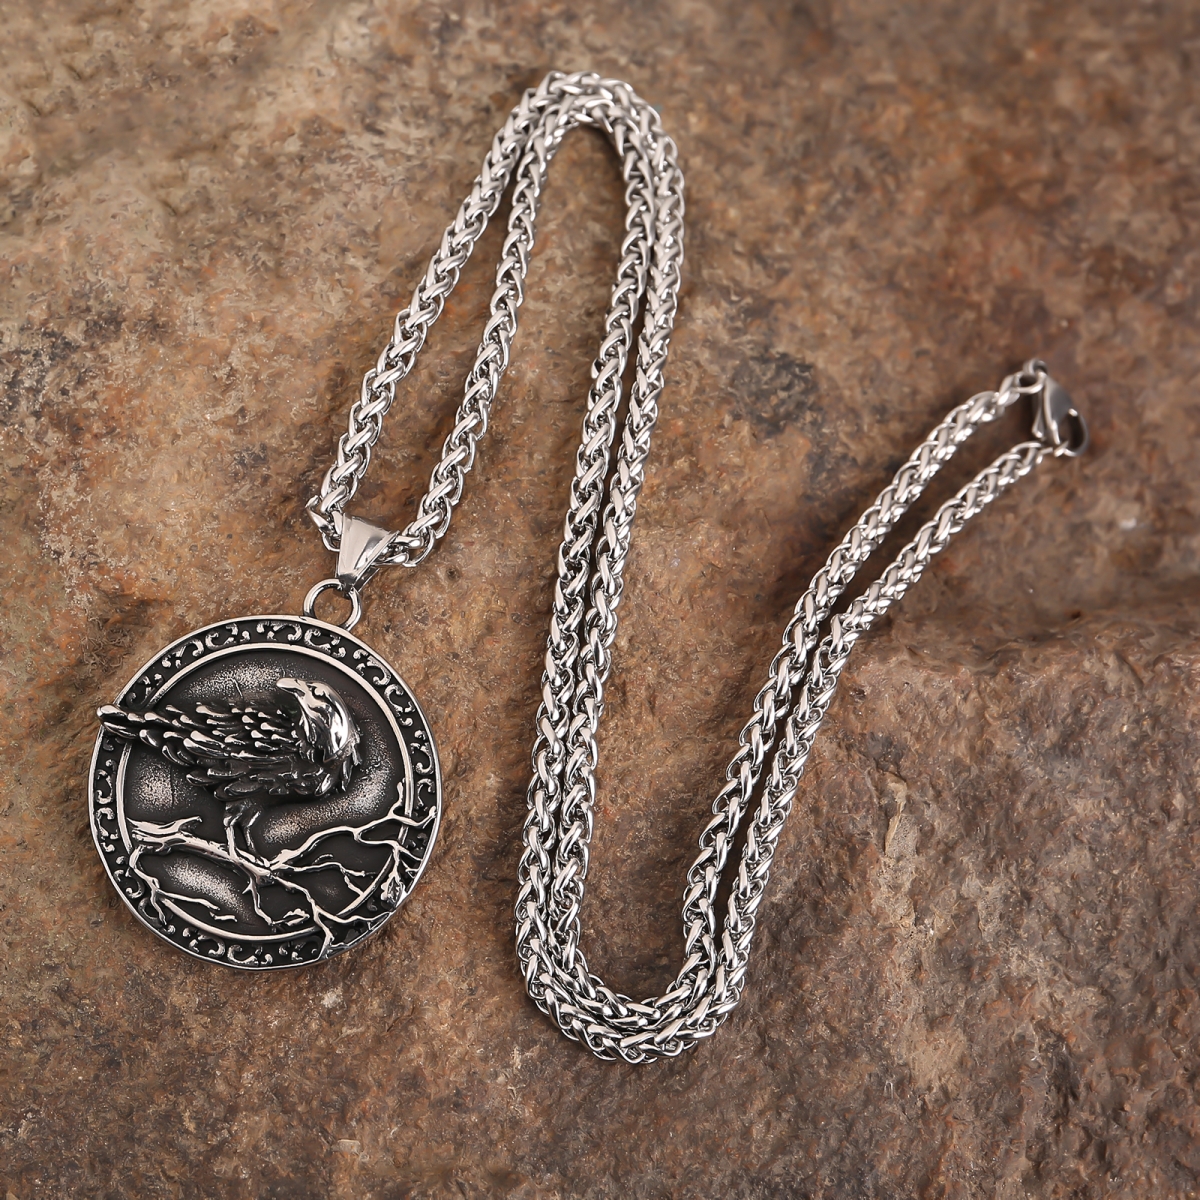 Viking necklace raven for women-NORSECOLLECTION- Viking Jewelry,Viking Necklace,Viking Bracelet,Viking Rings,Viking Mugs,Viking Accessories,Viking Crafts